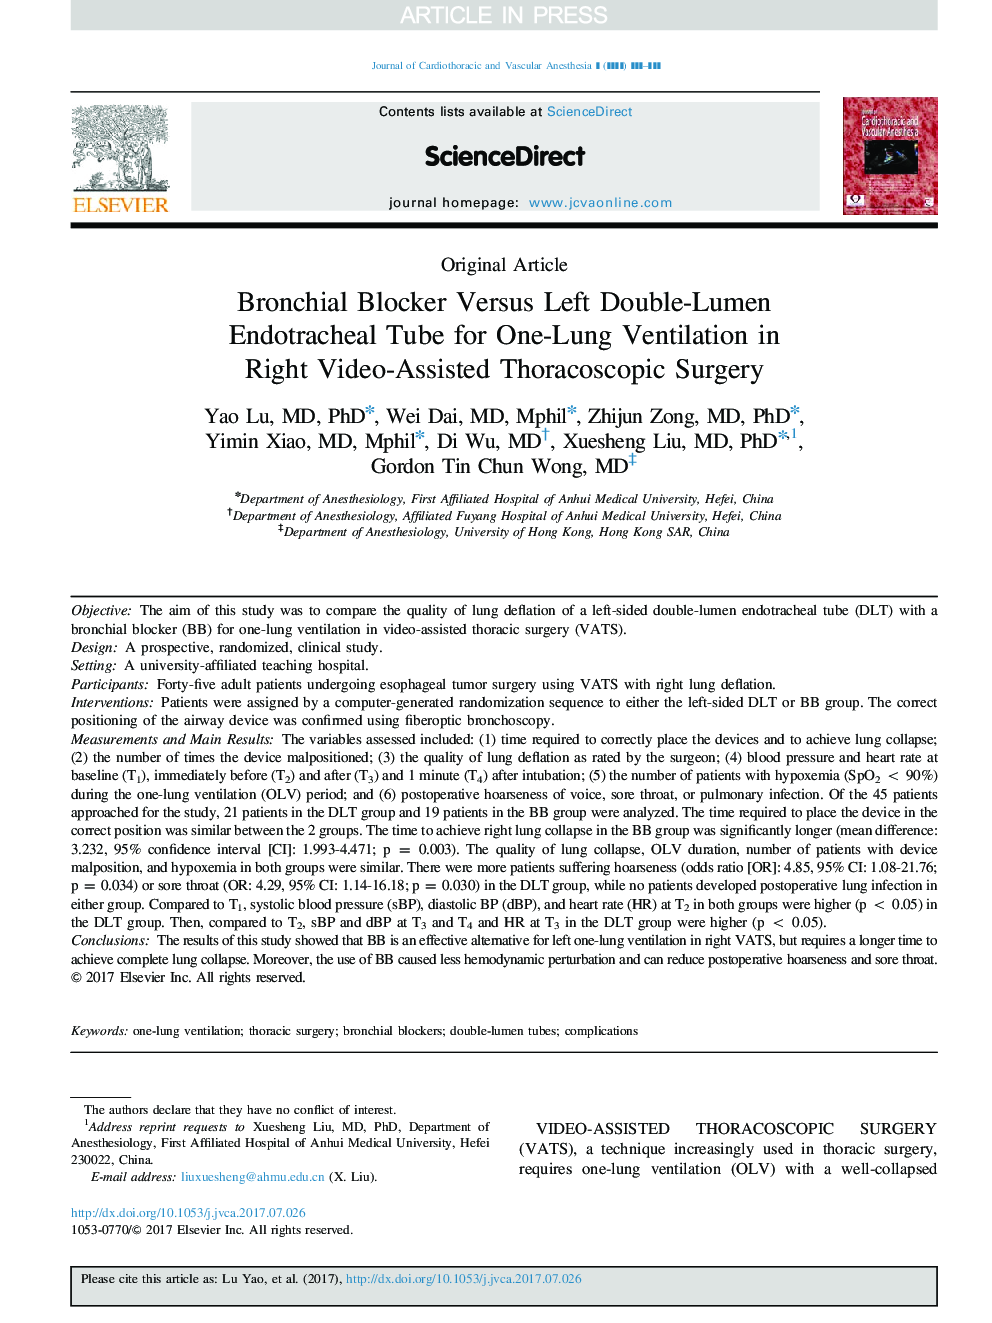 Bronchial Blocker Versus Left Double-Lumen Endotracheal Tube for One-Lung Ventilation in Right Video-Assisted Thoracoscopic Surgery